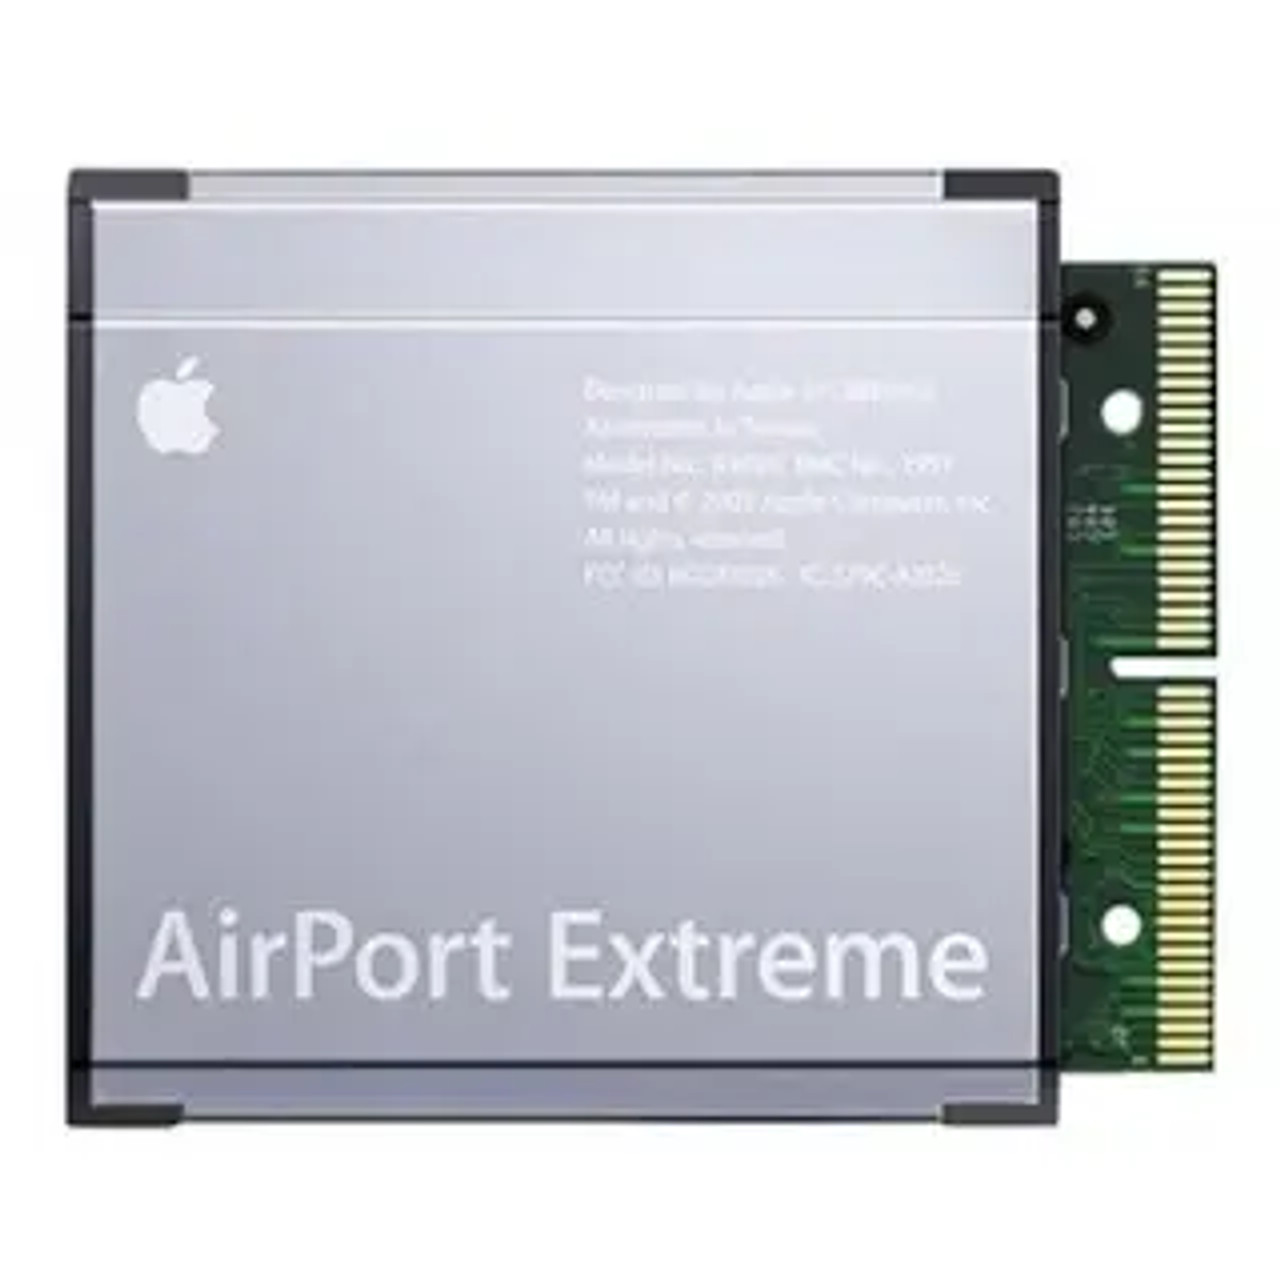 661-3045 | Apple | AirPort Extreme 54Mb / s IEEE 802.11g Wireless Network Card for PowerBook G4